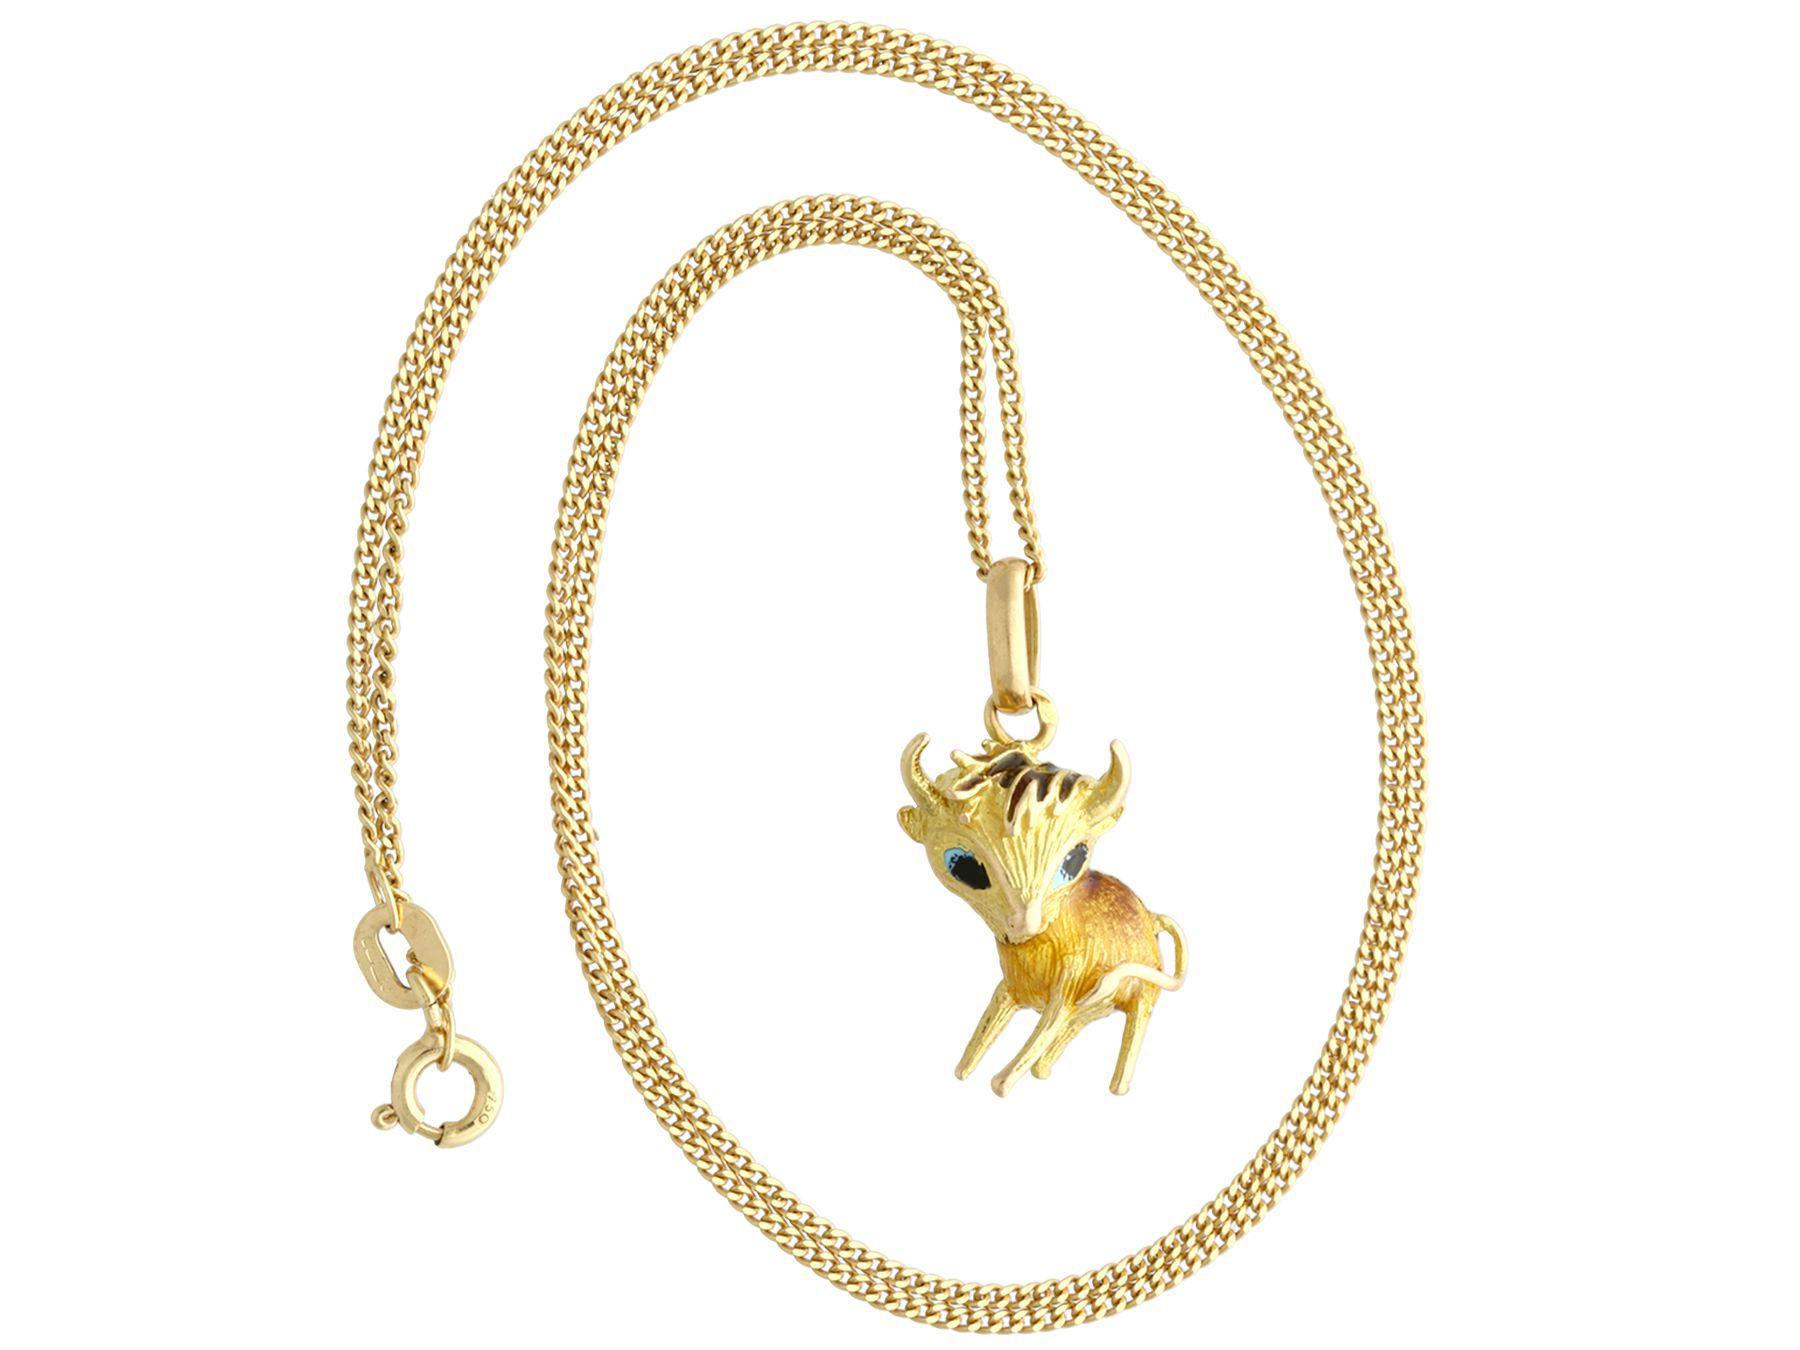 A fine and impressive vintage enamel and 18 karat yellow gold pendant in the form of a horned cow; part of our diverse gemstone jewelry and estate jewelry collections.

This fine and impressive vintage pendant has been crafted in 18k yellow